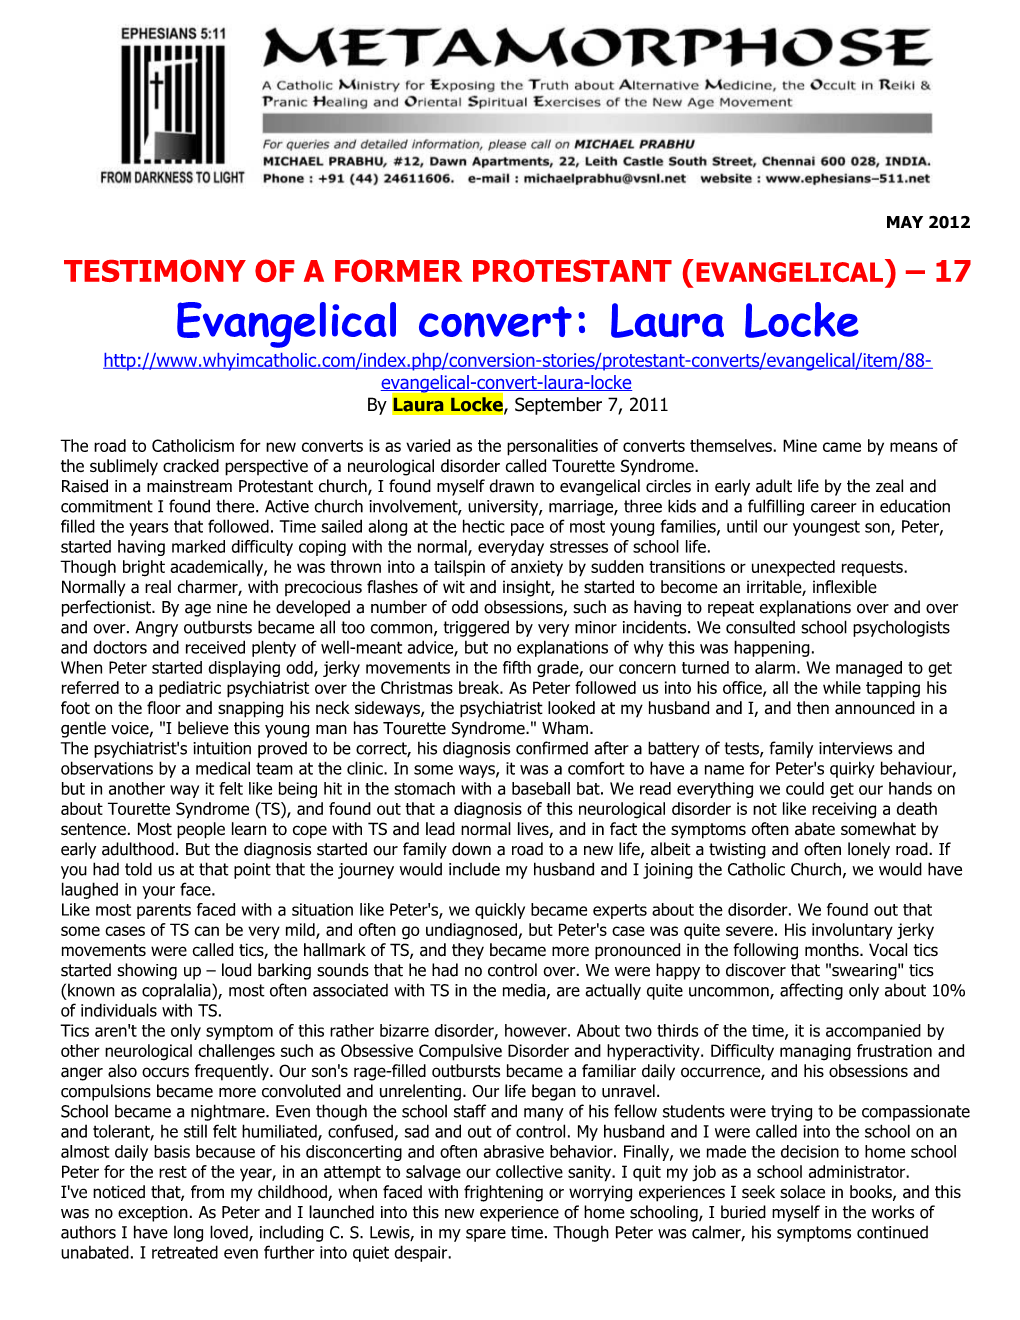 Testimony of a Former Protestant(Evangelical) 17